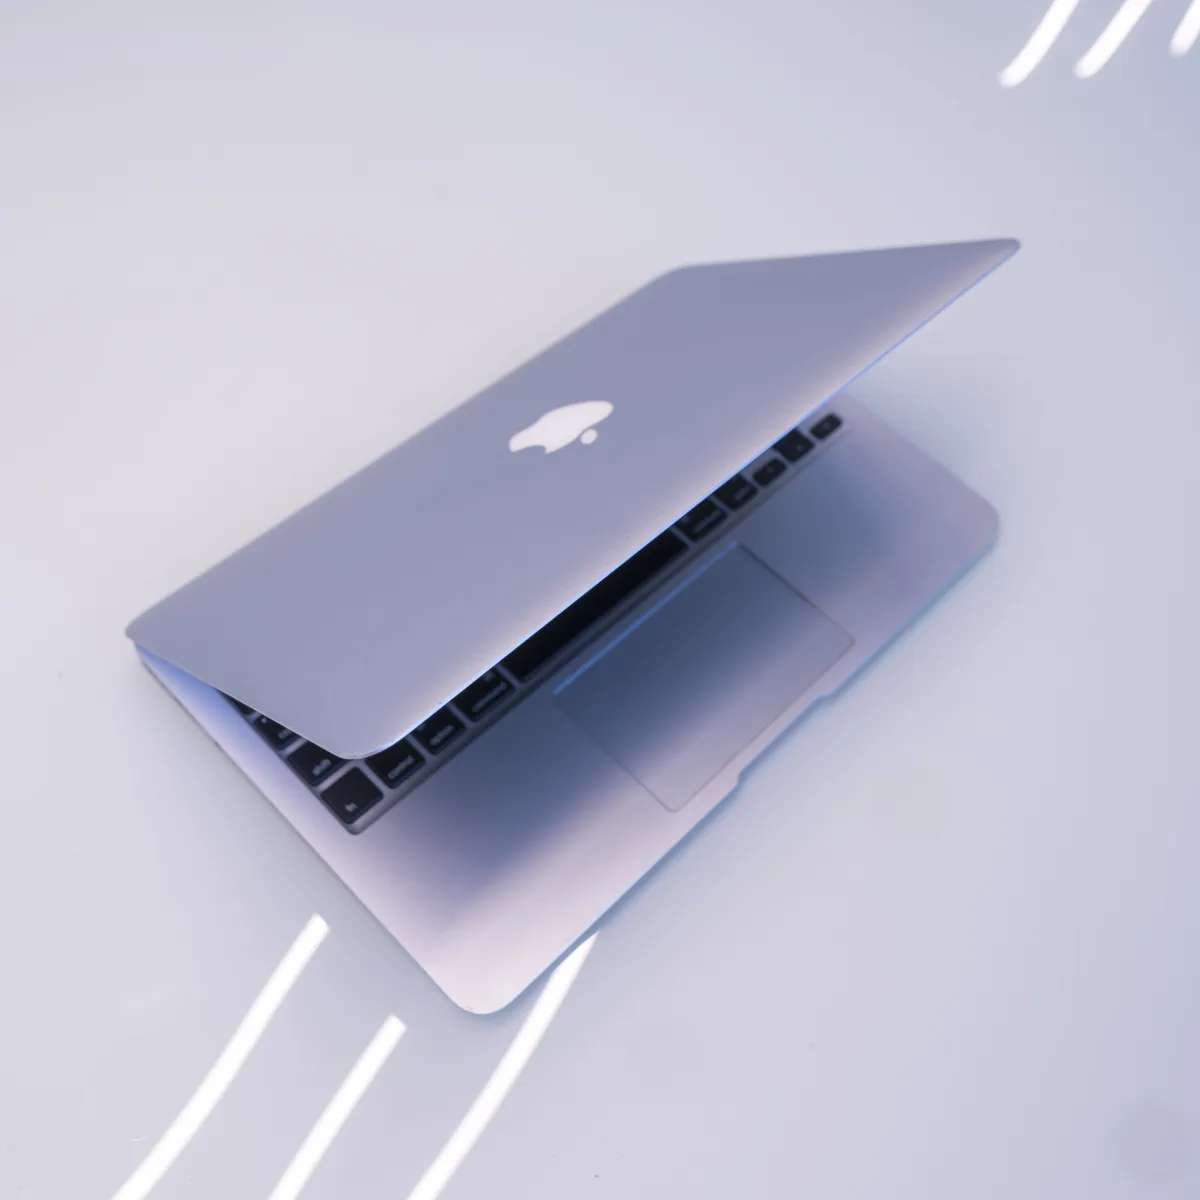 How to Fix USB Port Issues on Your MacBook Air? 1